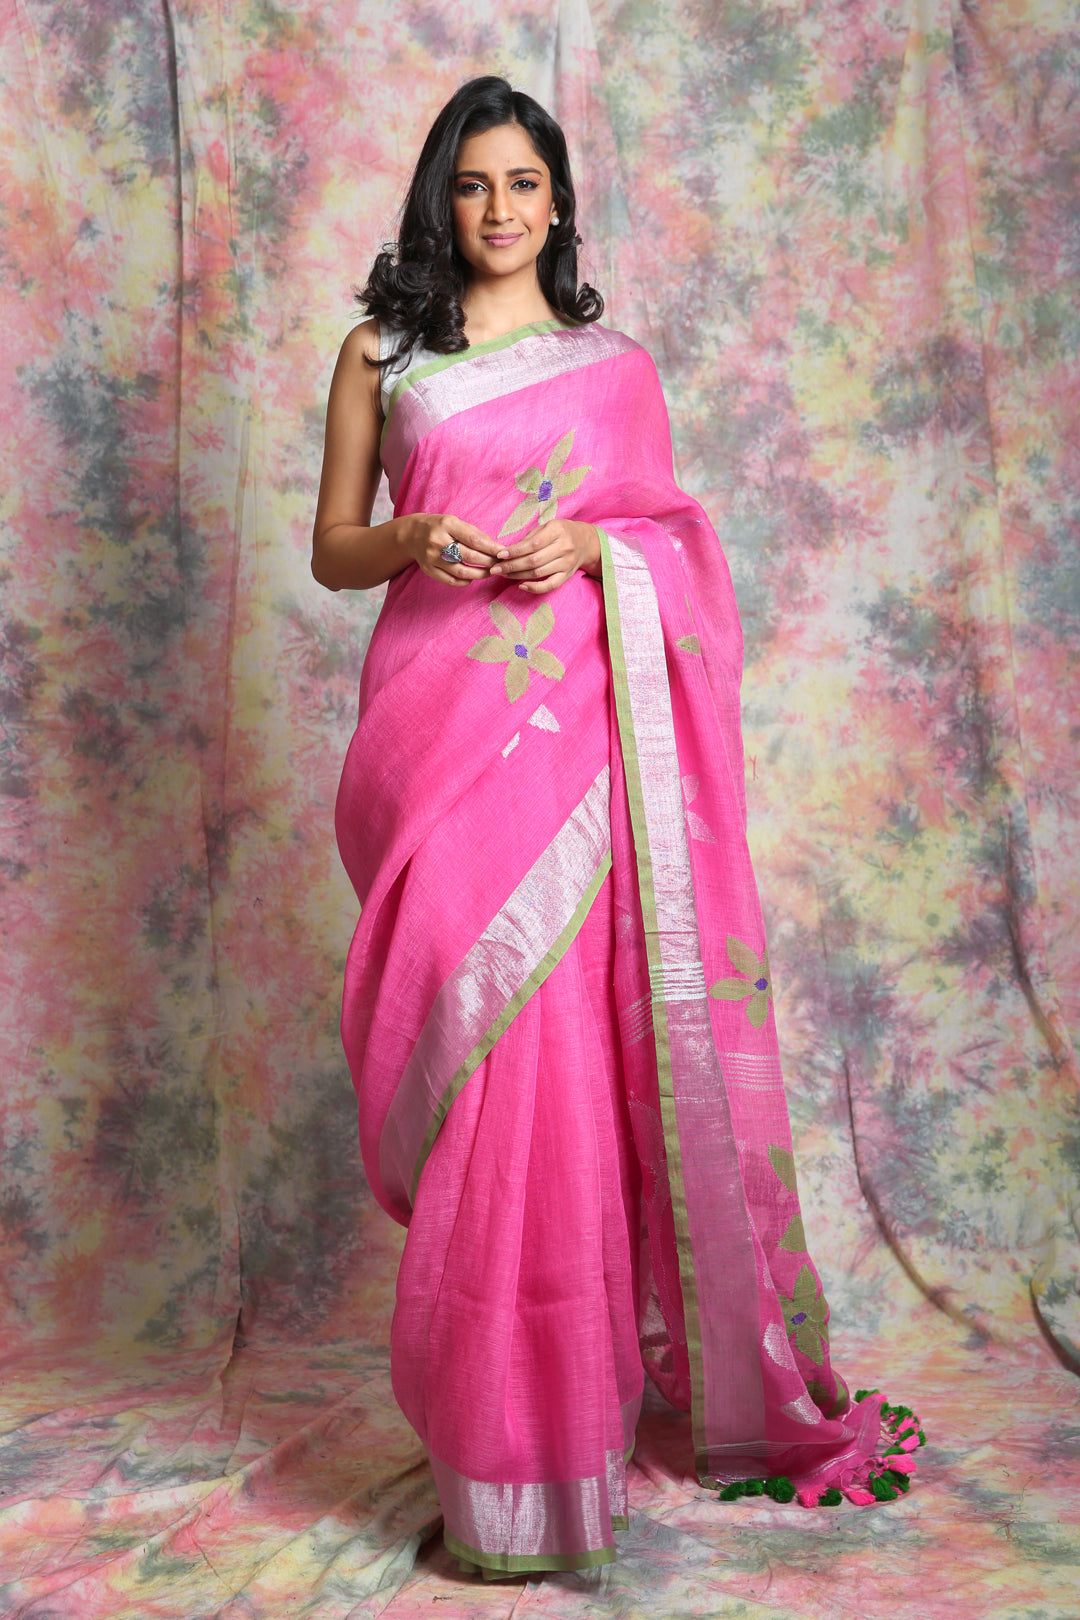 Pink Pure Linen Saree With Flower Motif In Body And Silver Border